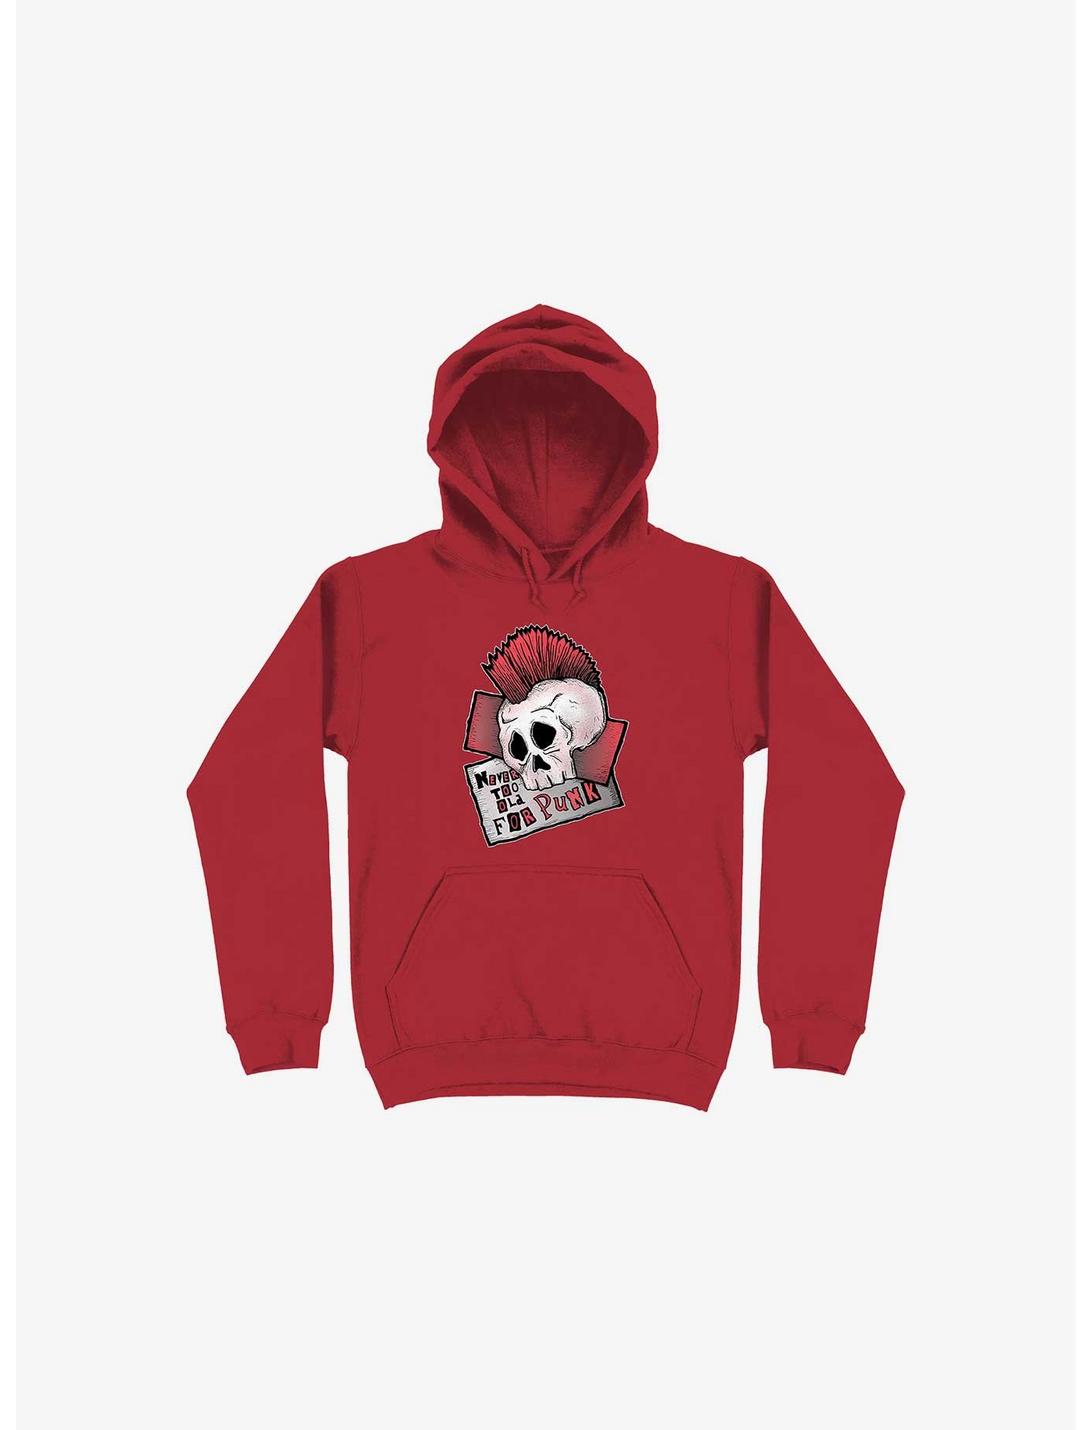 Never Too Old For Punk! Hoodie, RED, hi-res